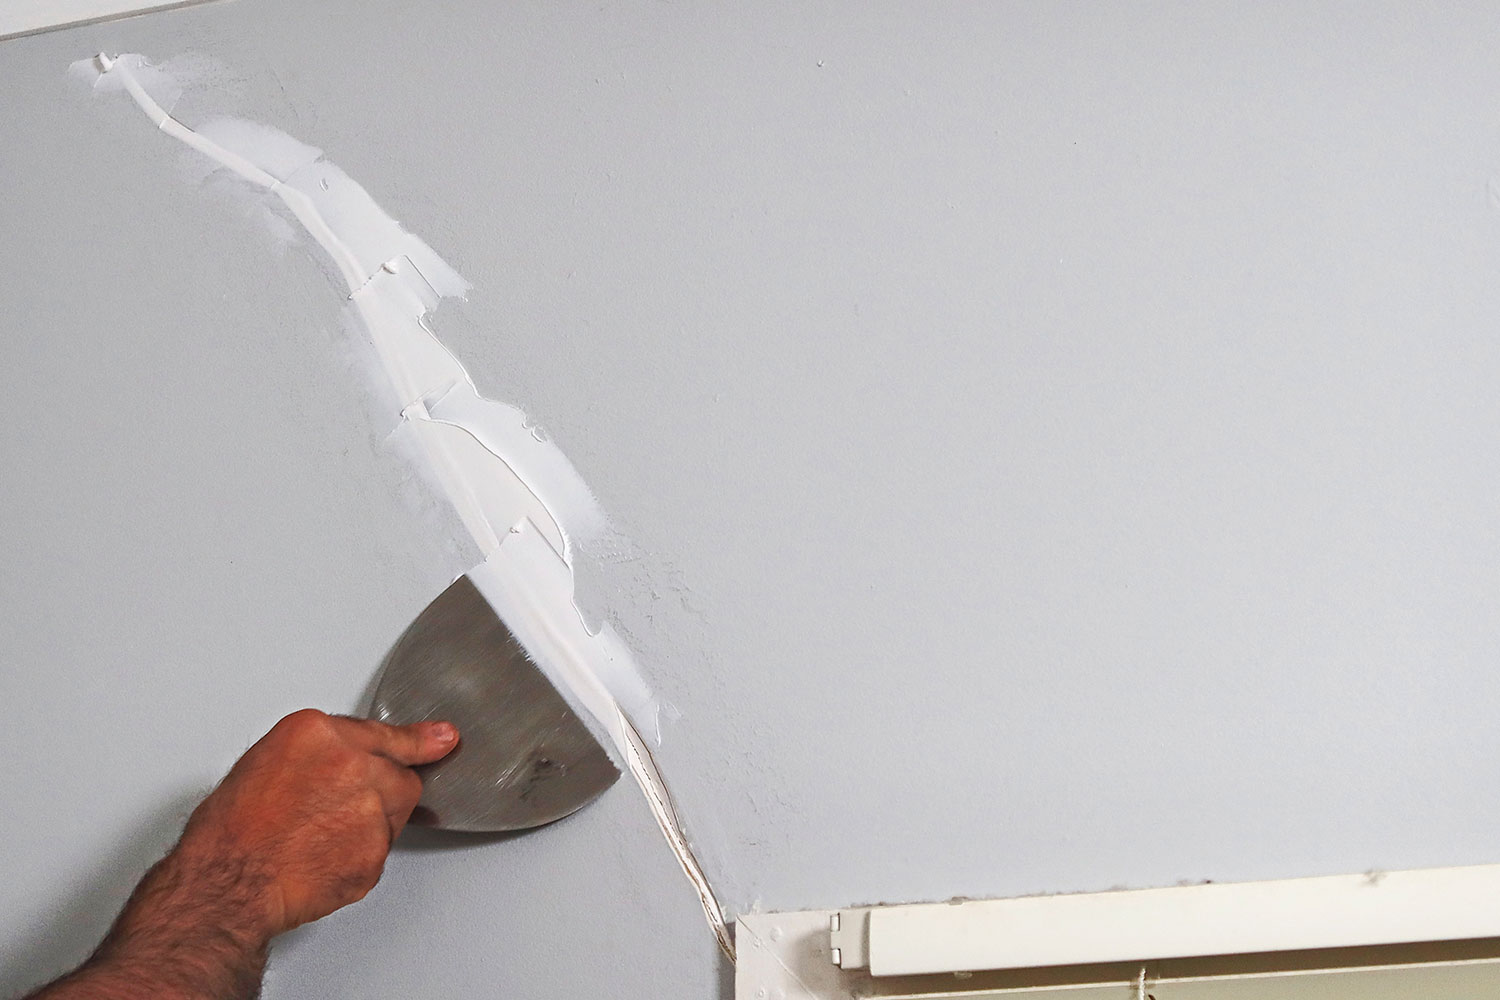 How to fix wall cracks: Step-by-step guide to repairing a crack in